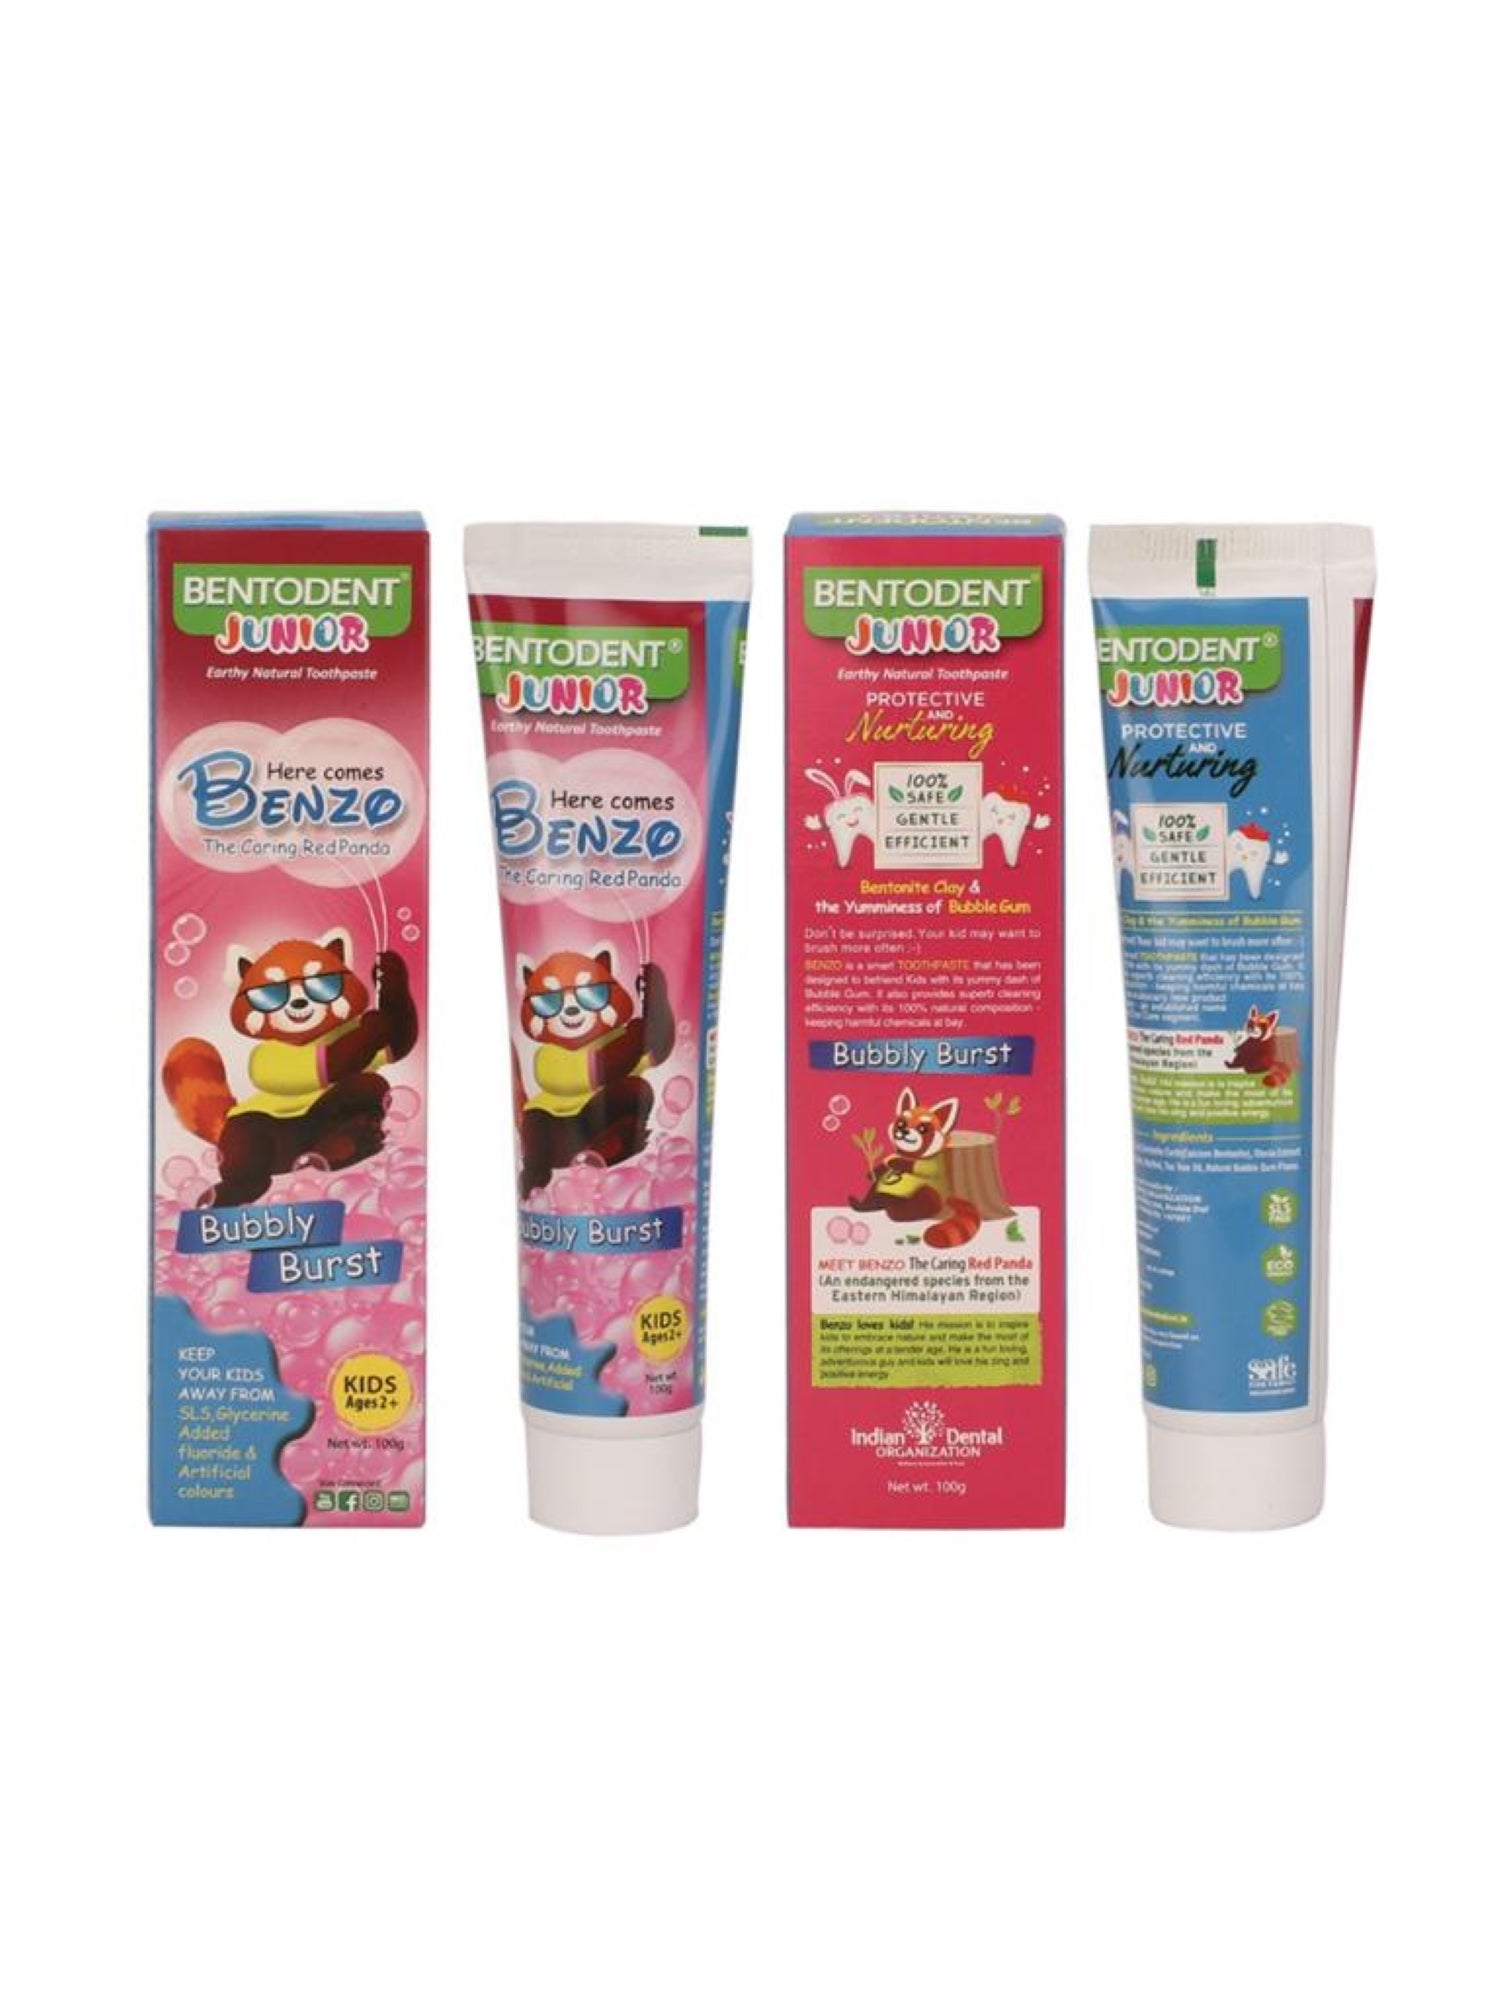 Bentodent Junior Bubble Gum Natural Toothpaste (Twin Pack) - 100 gm each - Indian Dental Organization